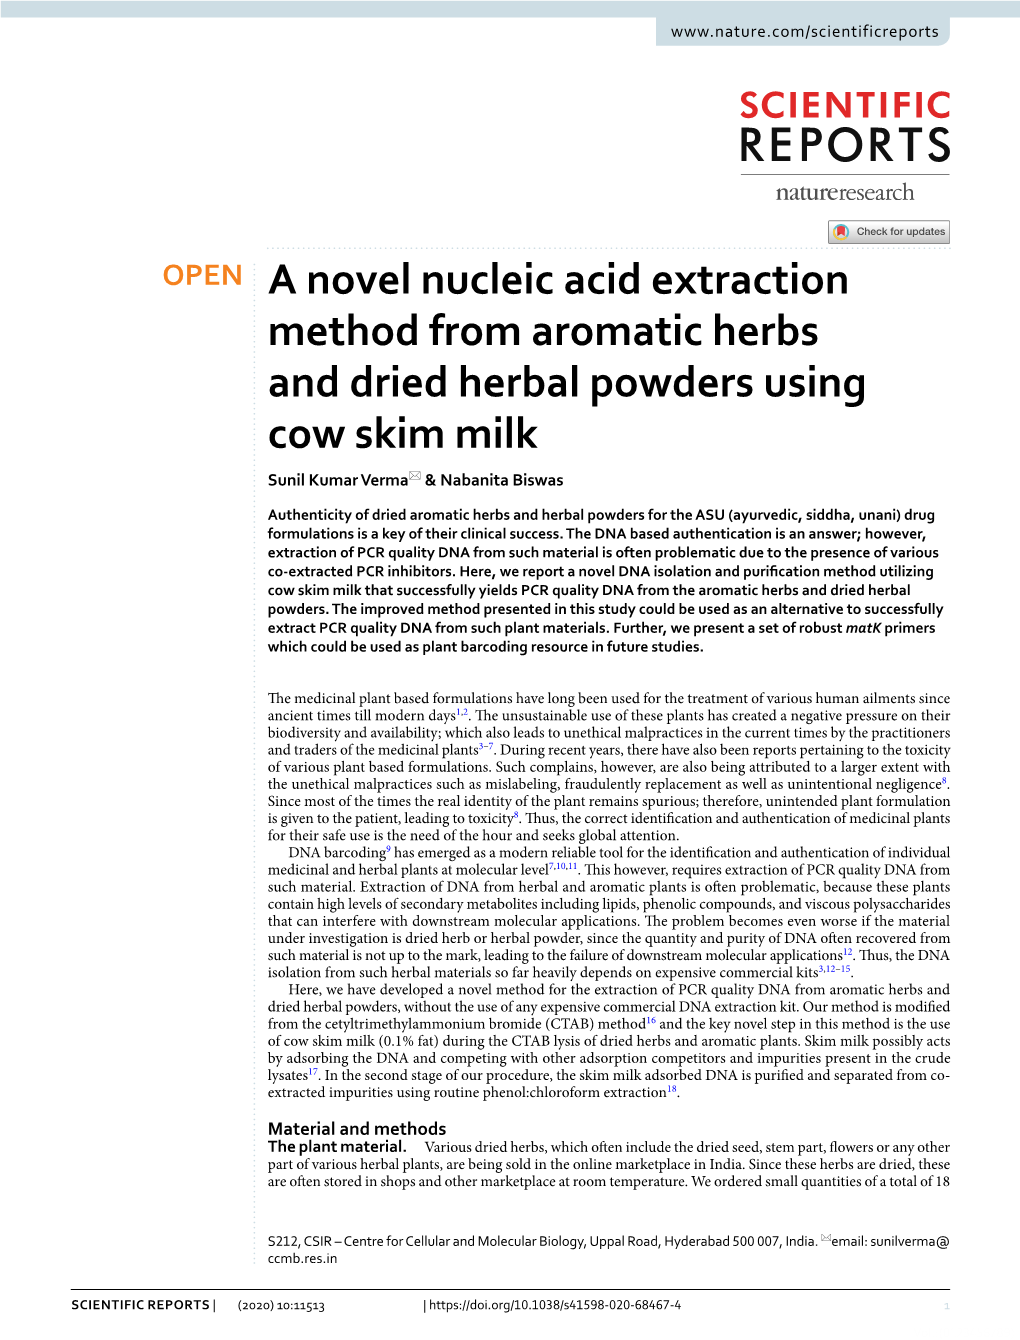 A Novel Nucleic Acid Extraction Method from Aromatic Herbs and Dried Herbal Powders Using Cow Skim Milk Sunil Kumar Verma* & Nabanita Biswas